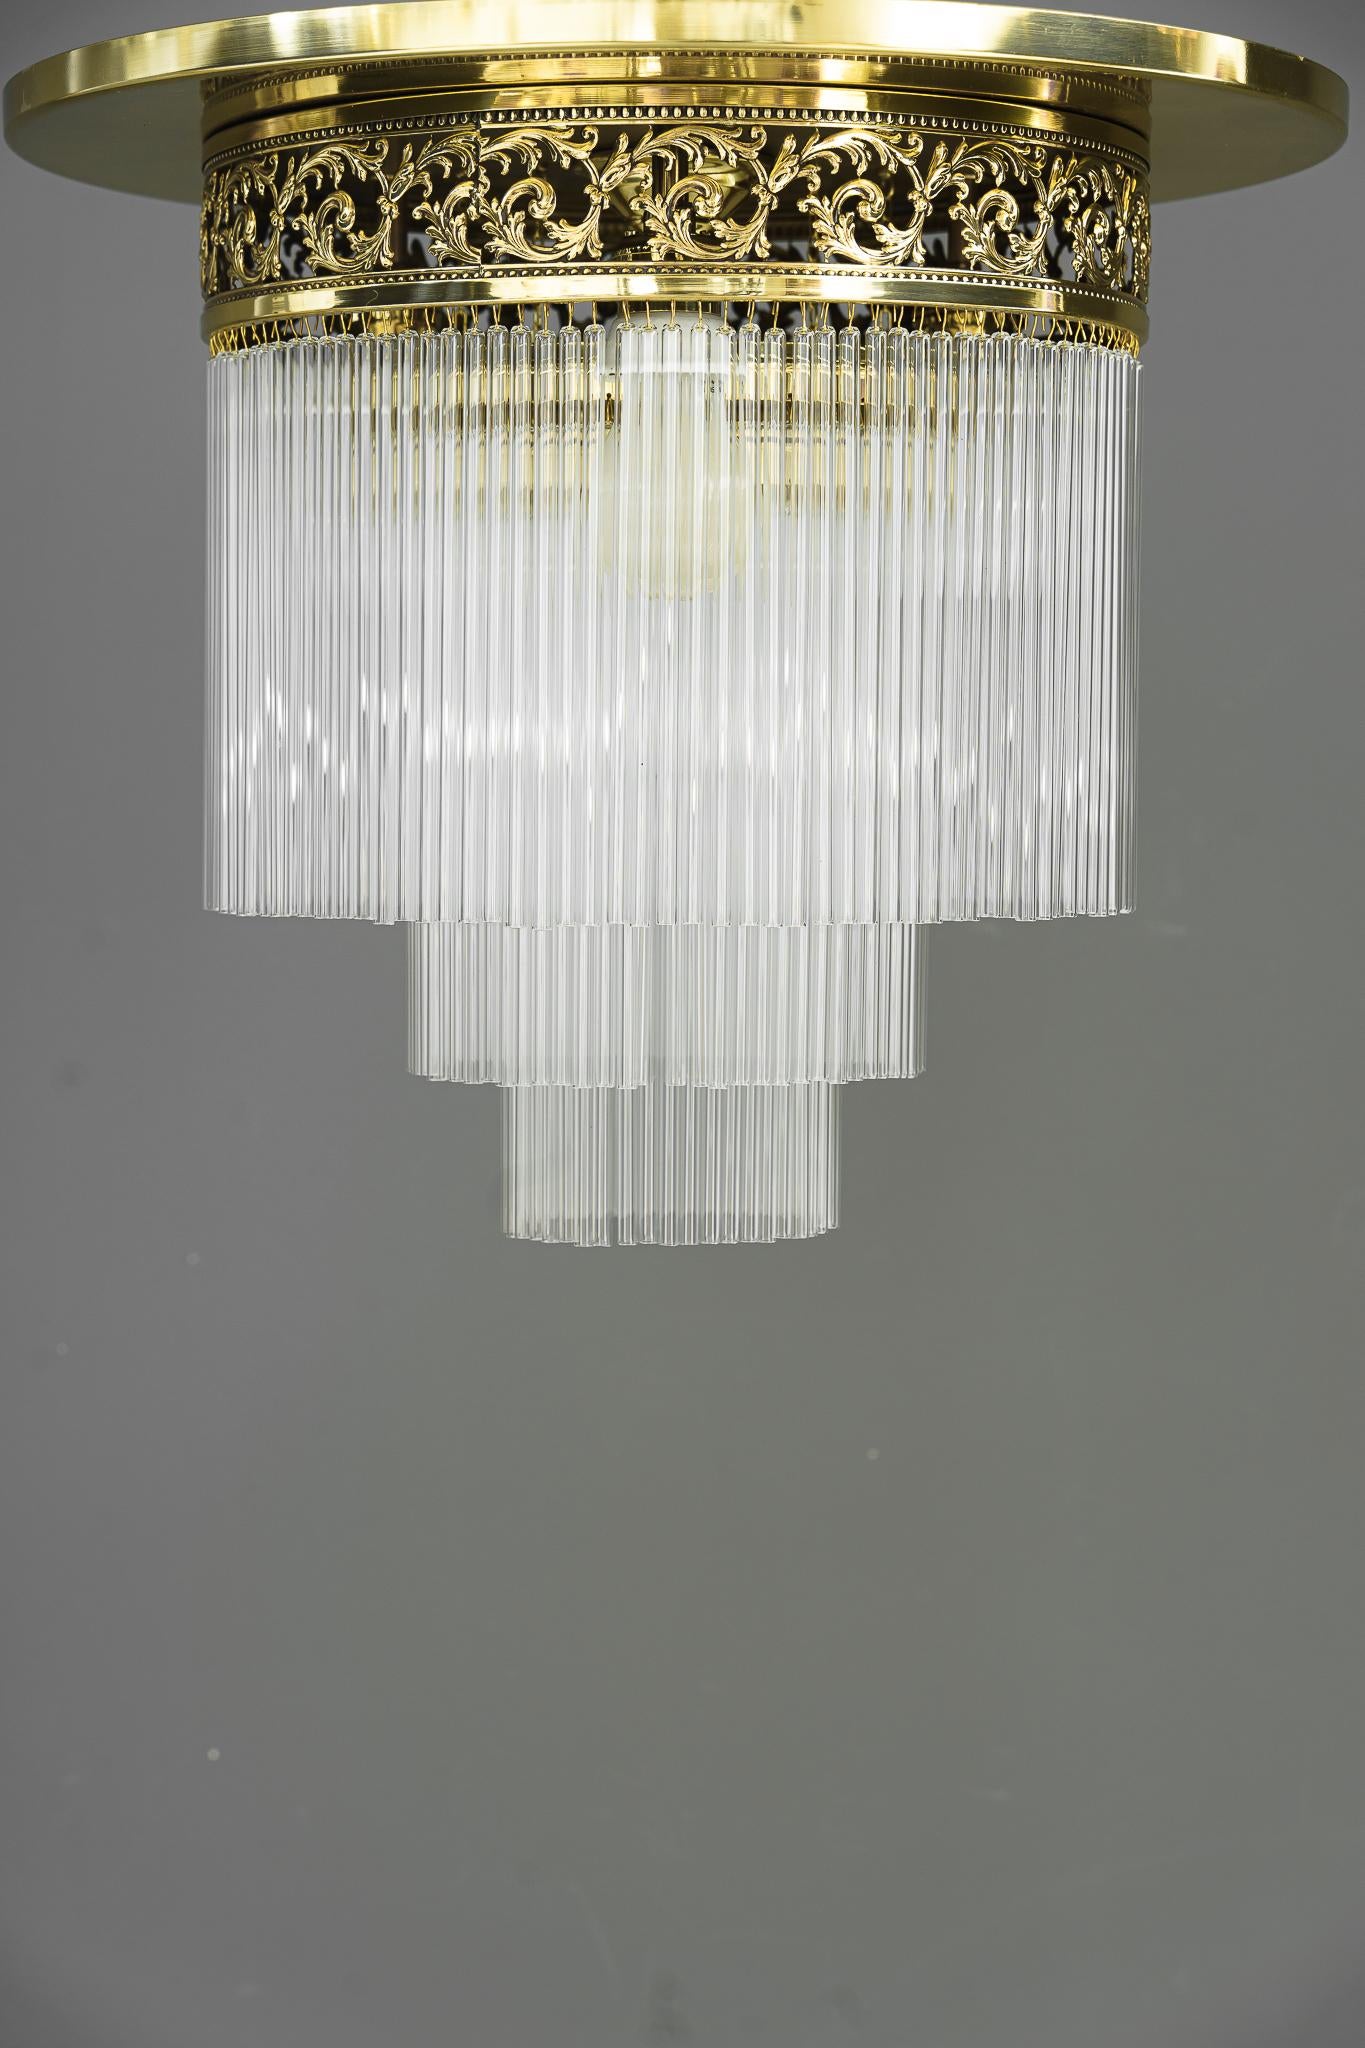 Art Deco ceiling lamp with glass sticks, Vienna, around 1920s.
The glass sticks are replaced.
Polished and stove enameled.